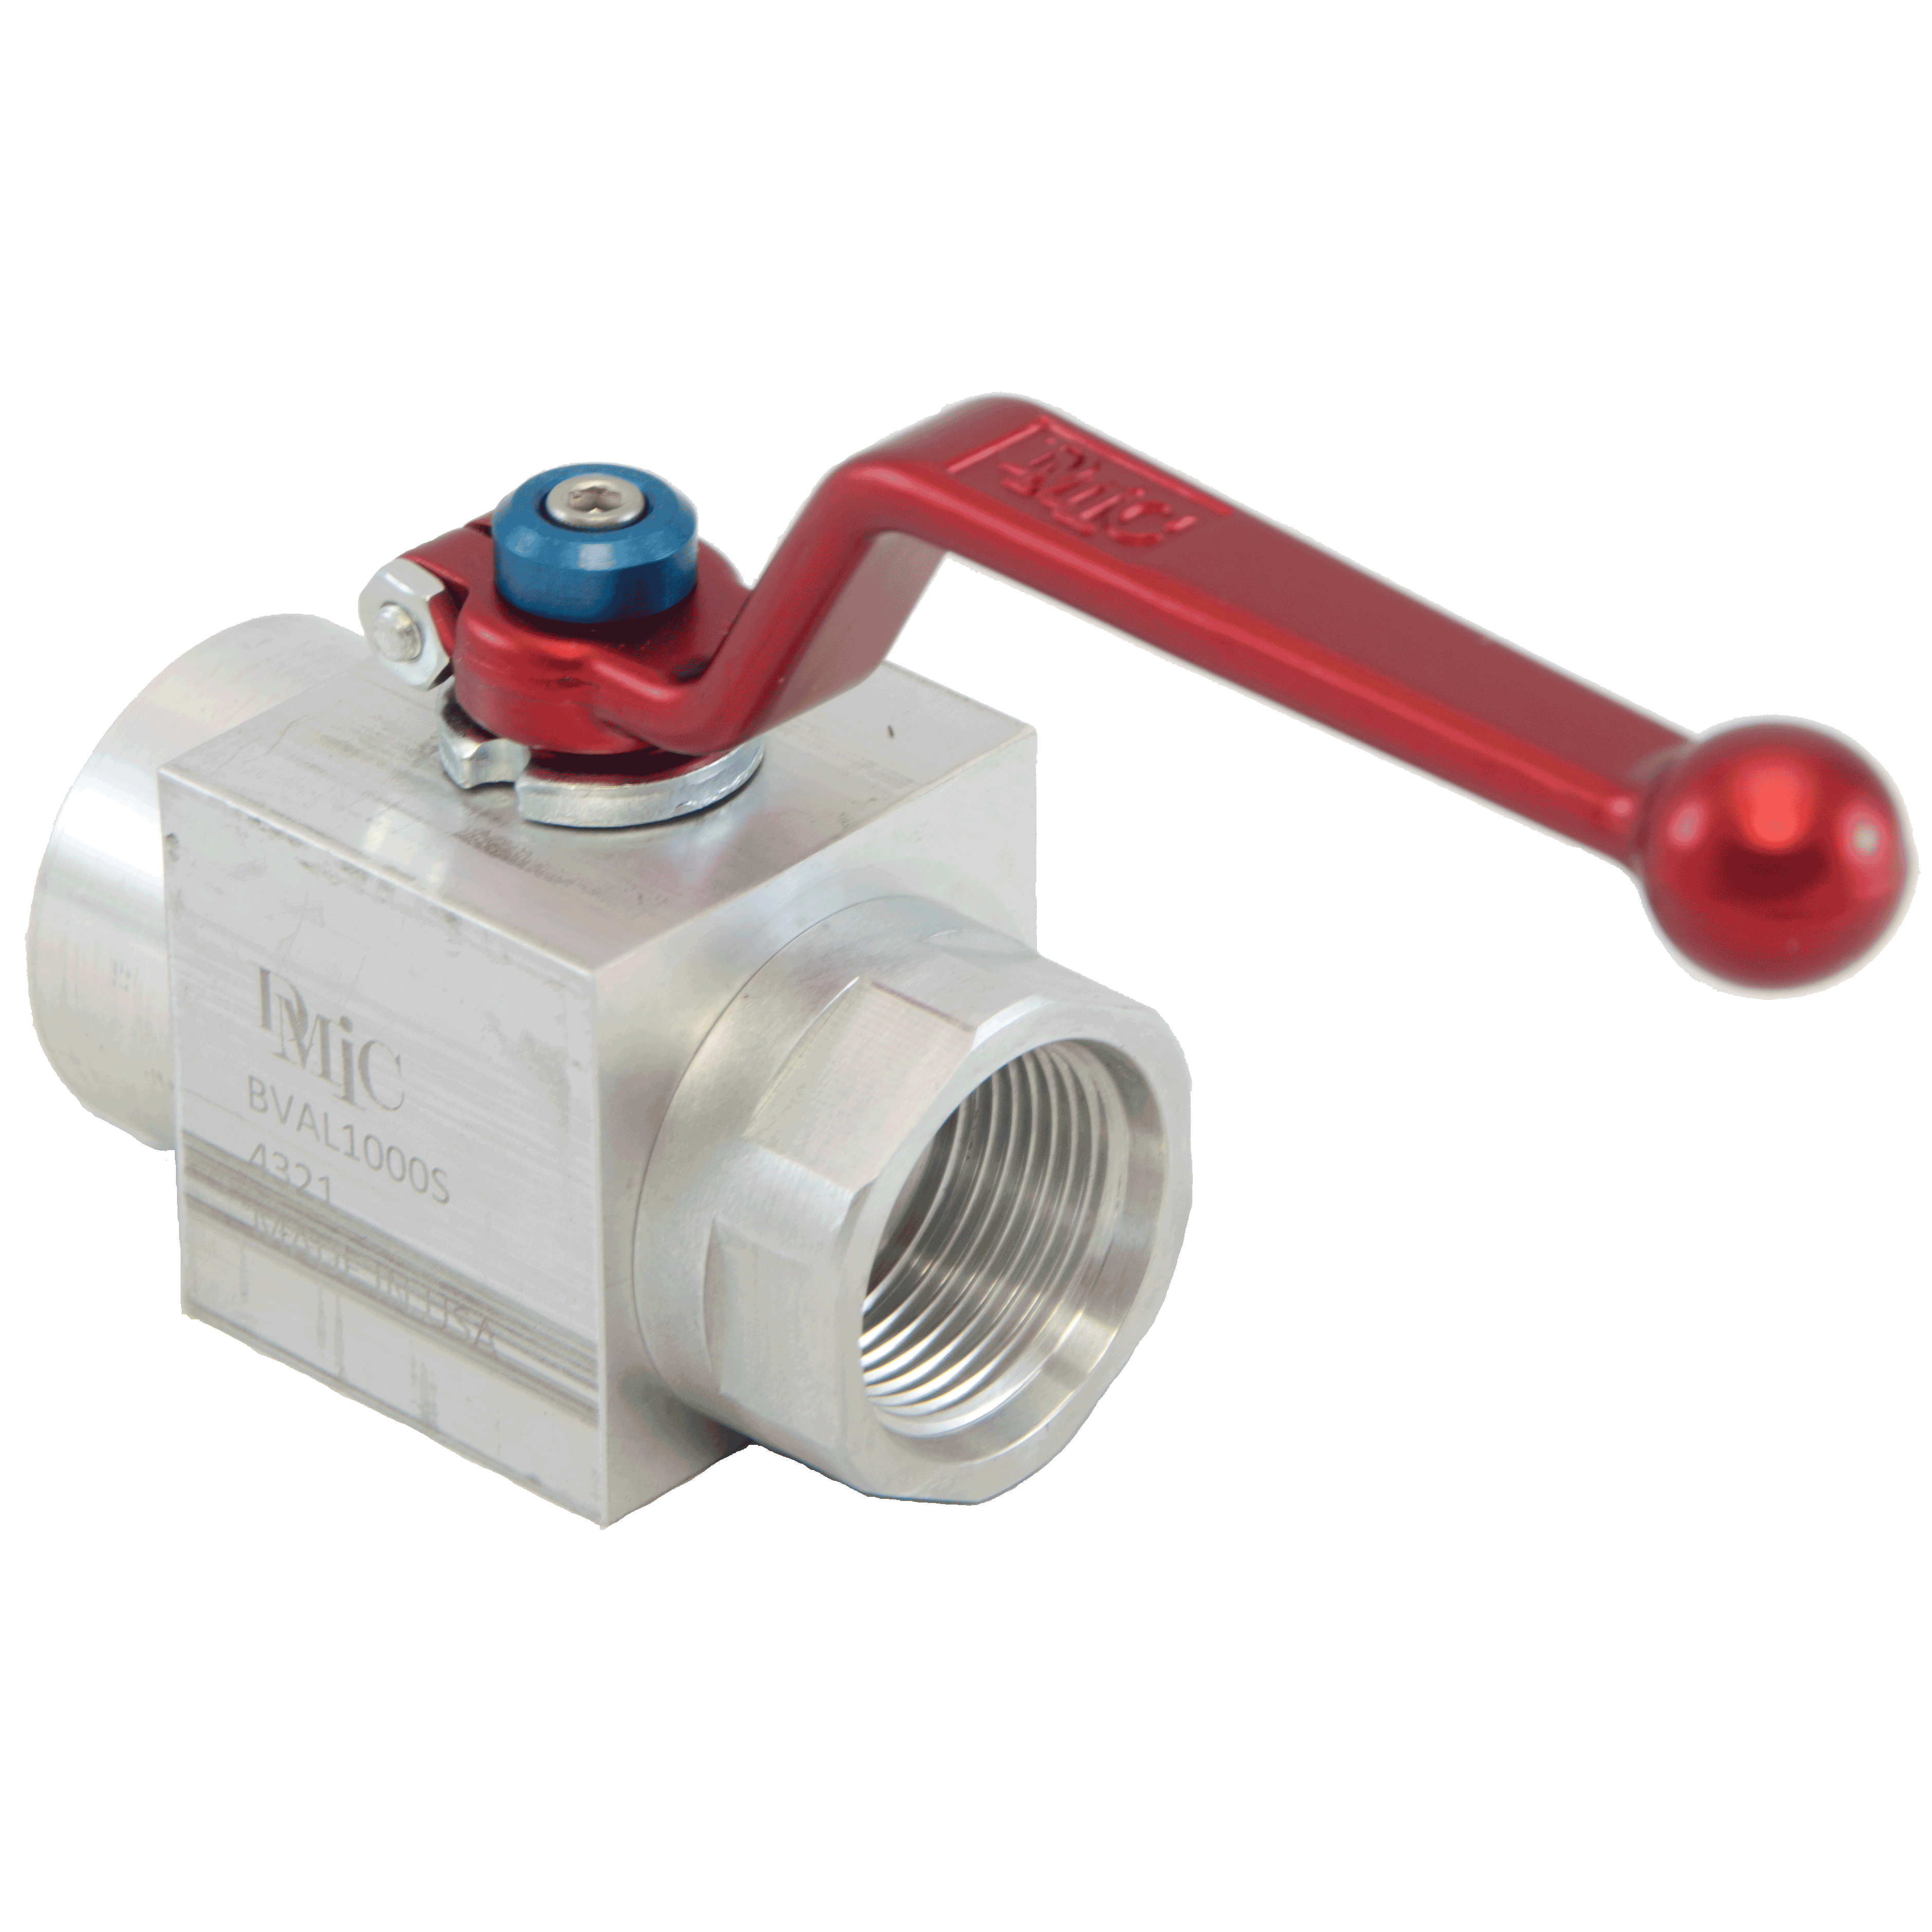 BVAL-0375N-4321-AZZN : DMIC Suction Ball Valve, 3/8 NPT, Aluminum, 600psi, Two-Way, with Locking Handle